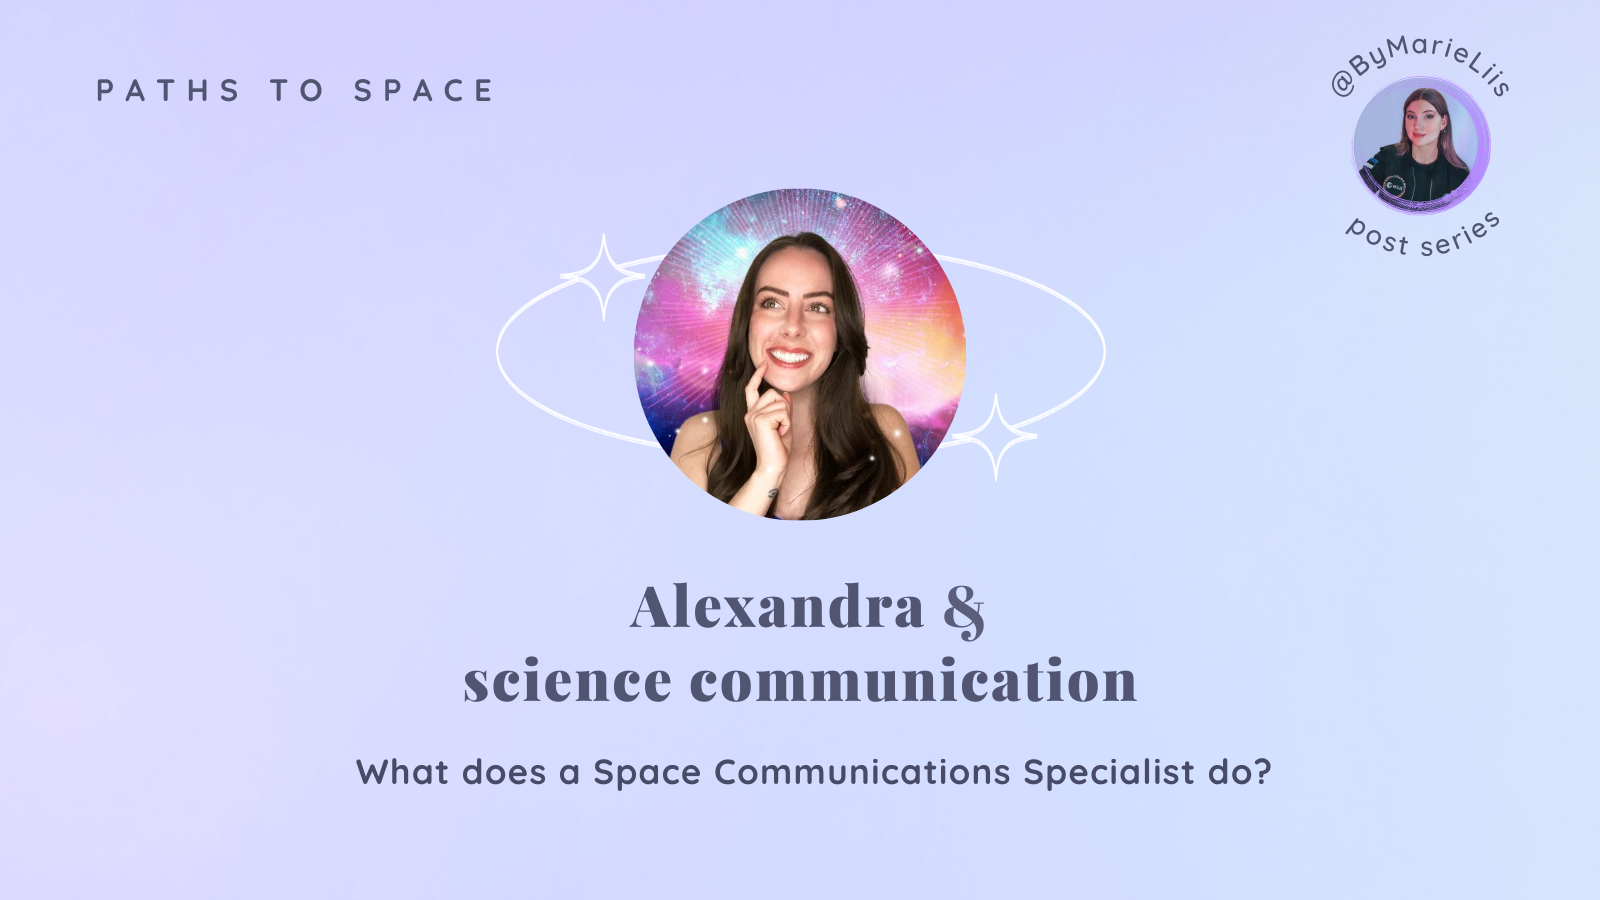 What Does a Science Communicator Do- Pt. 1: Alexandra & Space Comm